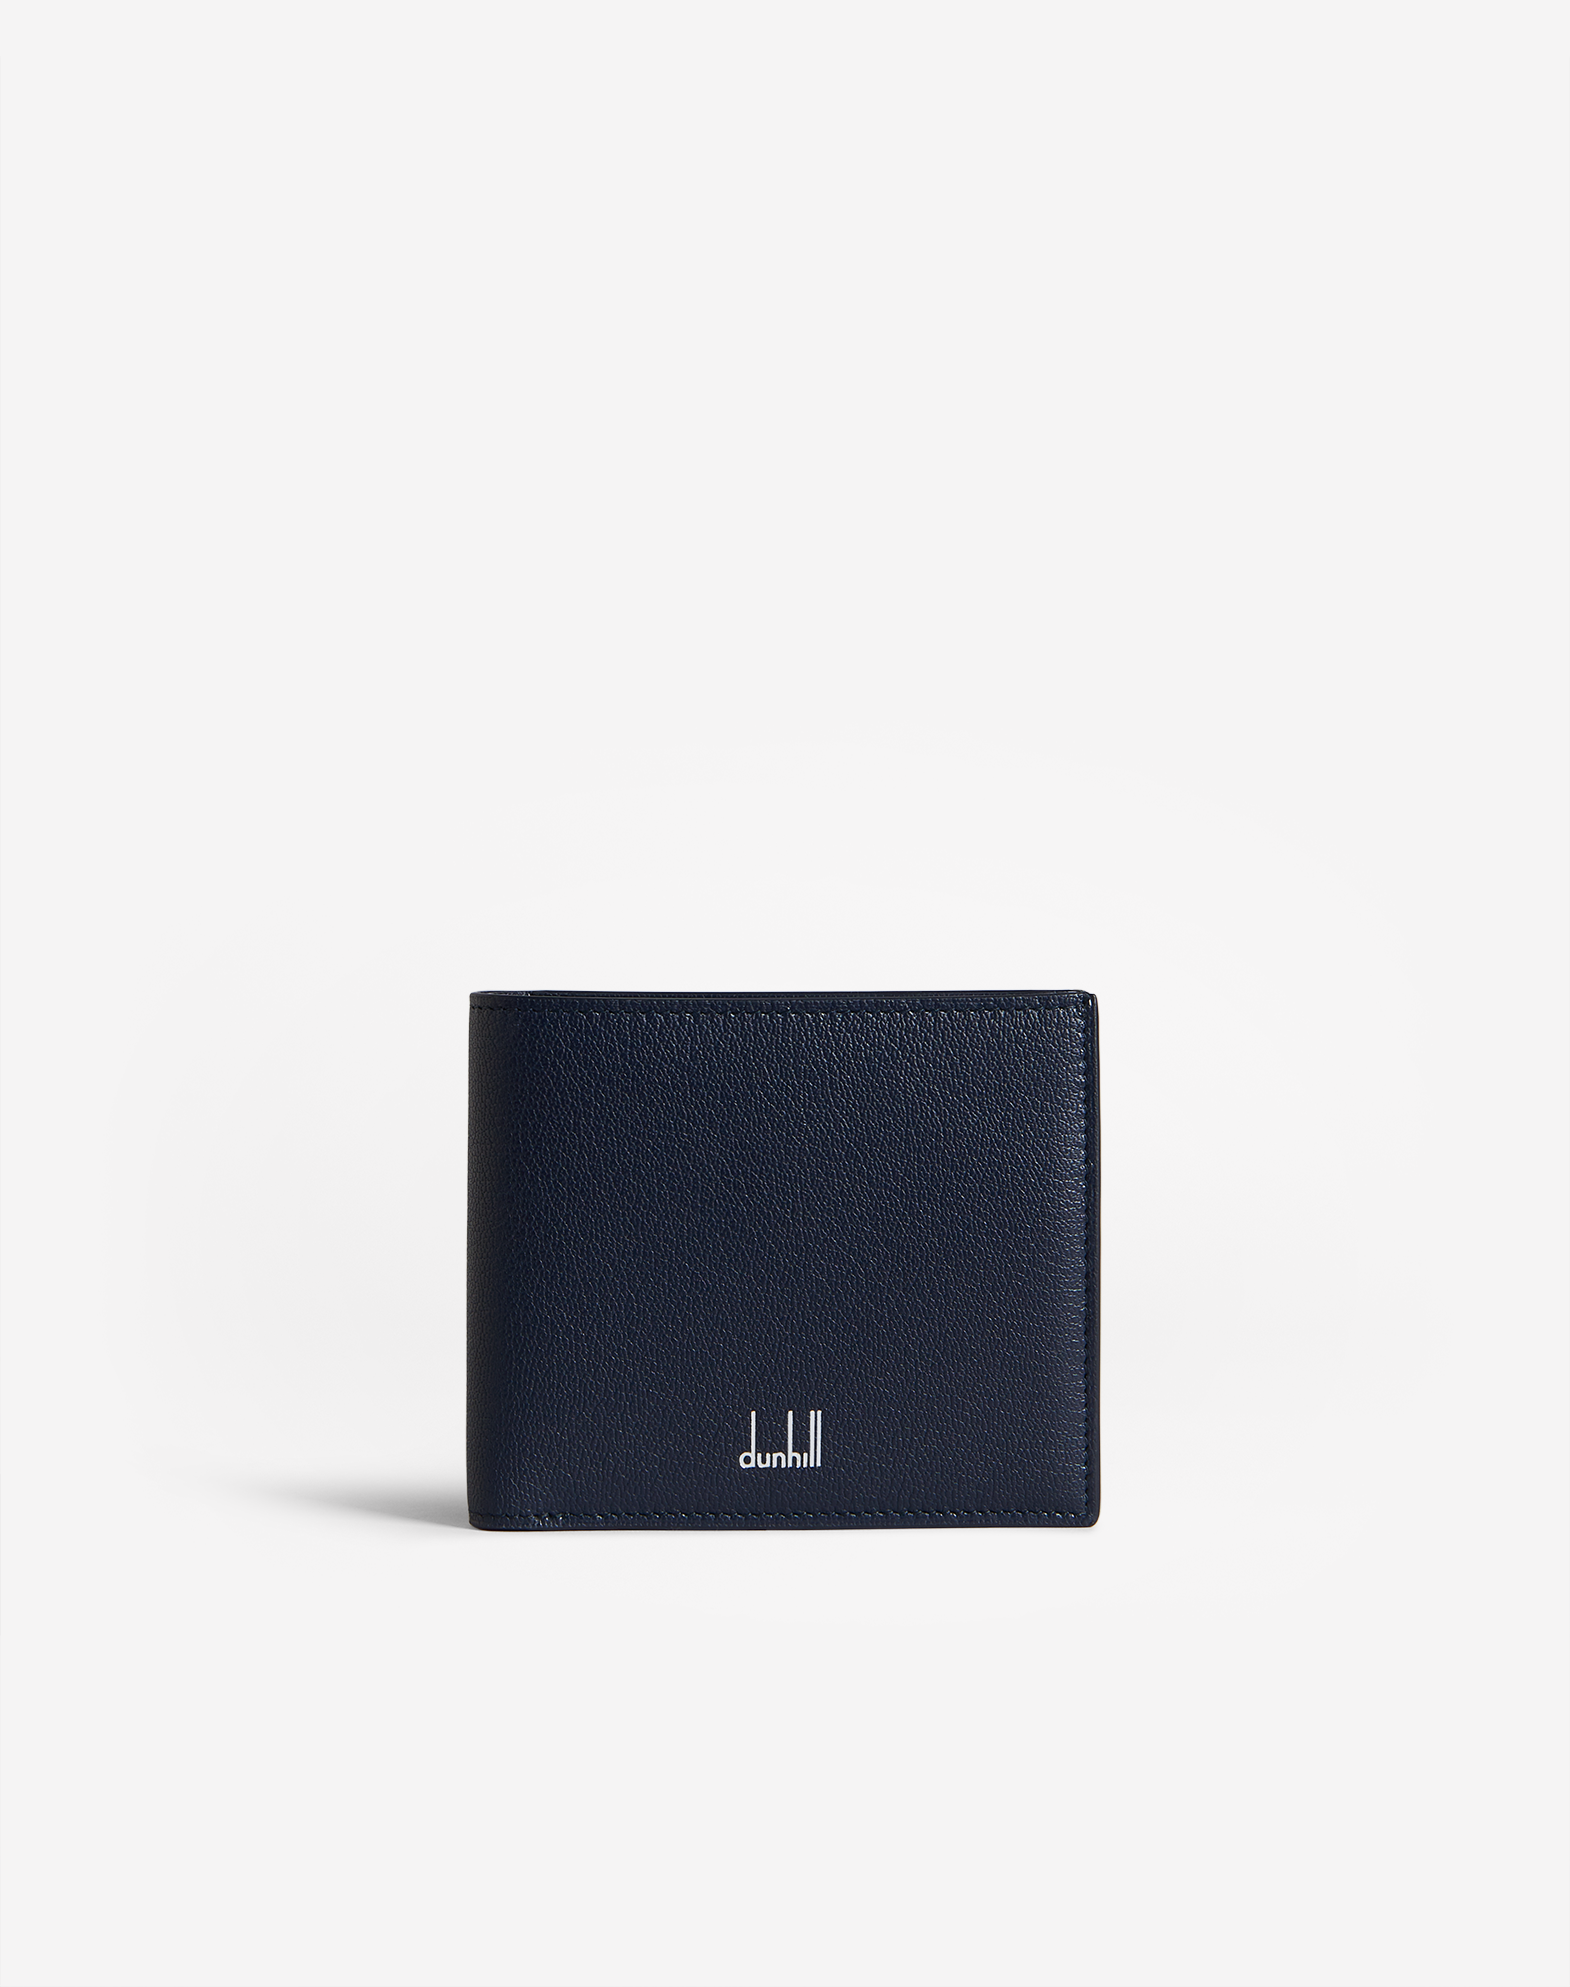 Dunhill Duke Fine Leather 4cc & Coin Purse Billfold Wallet In Navy